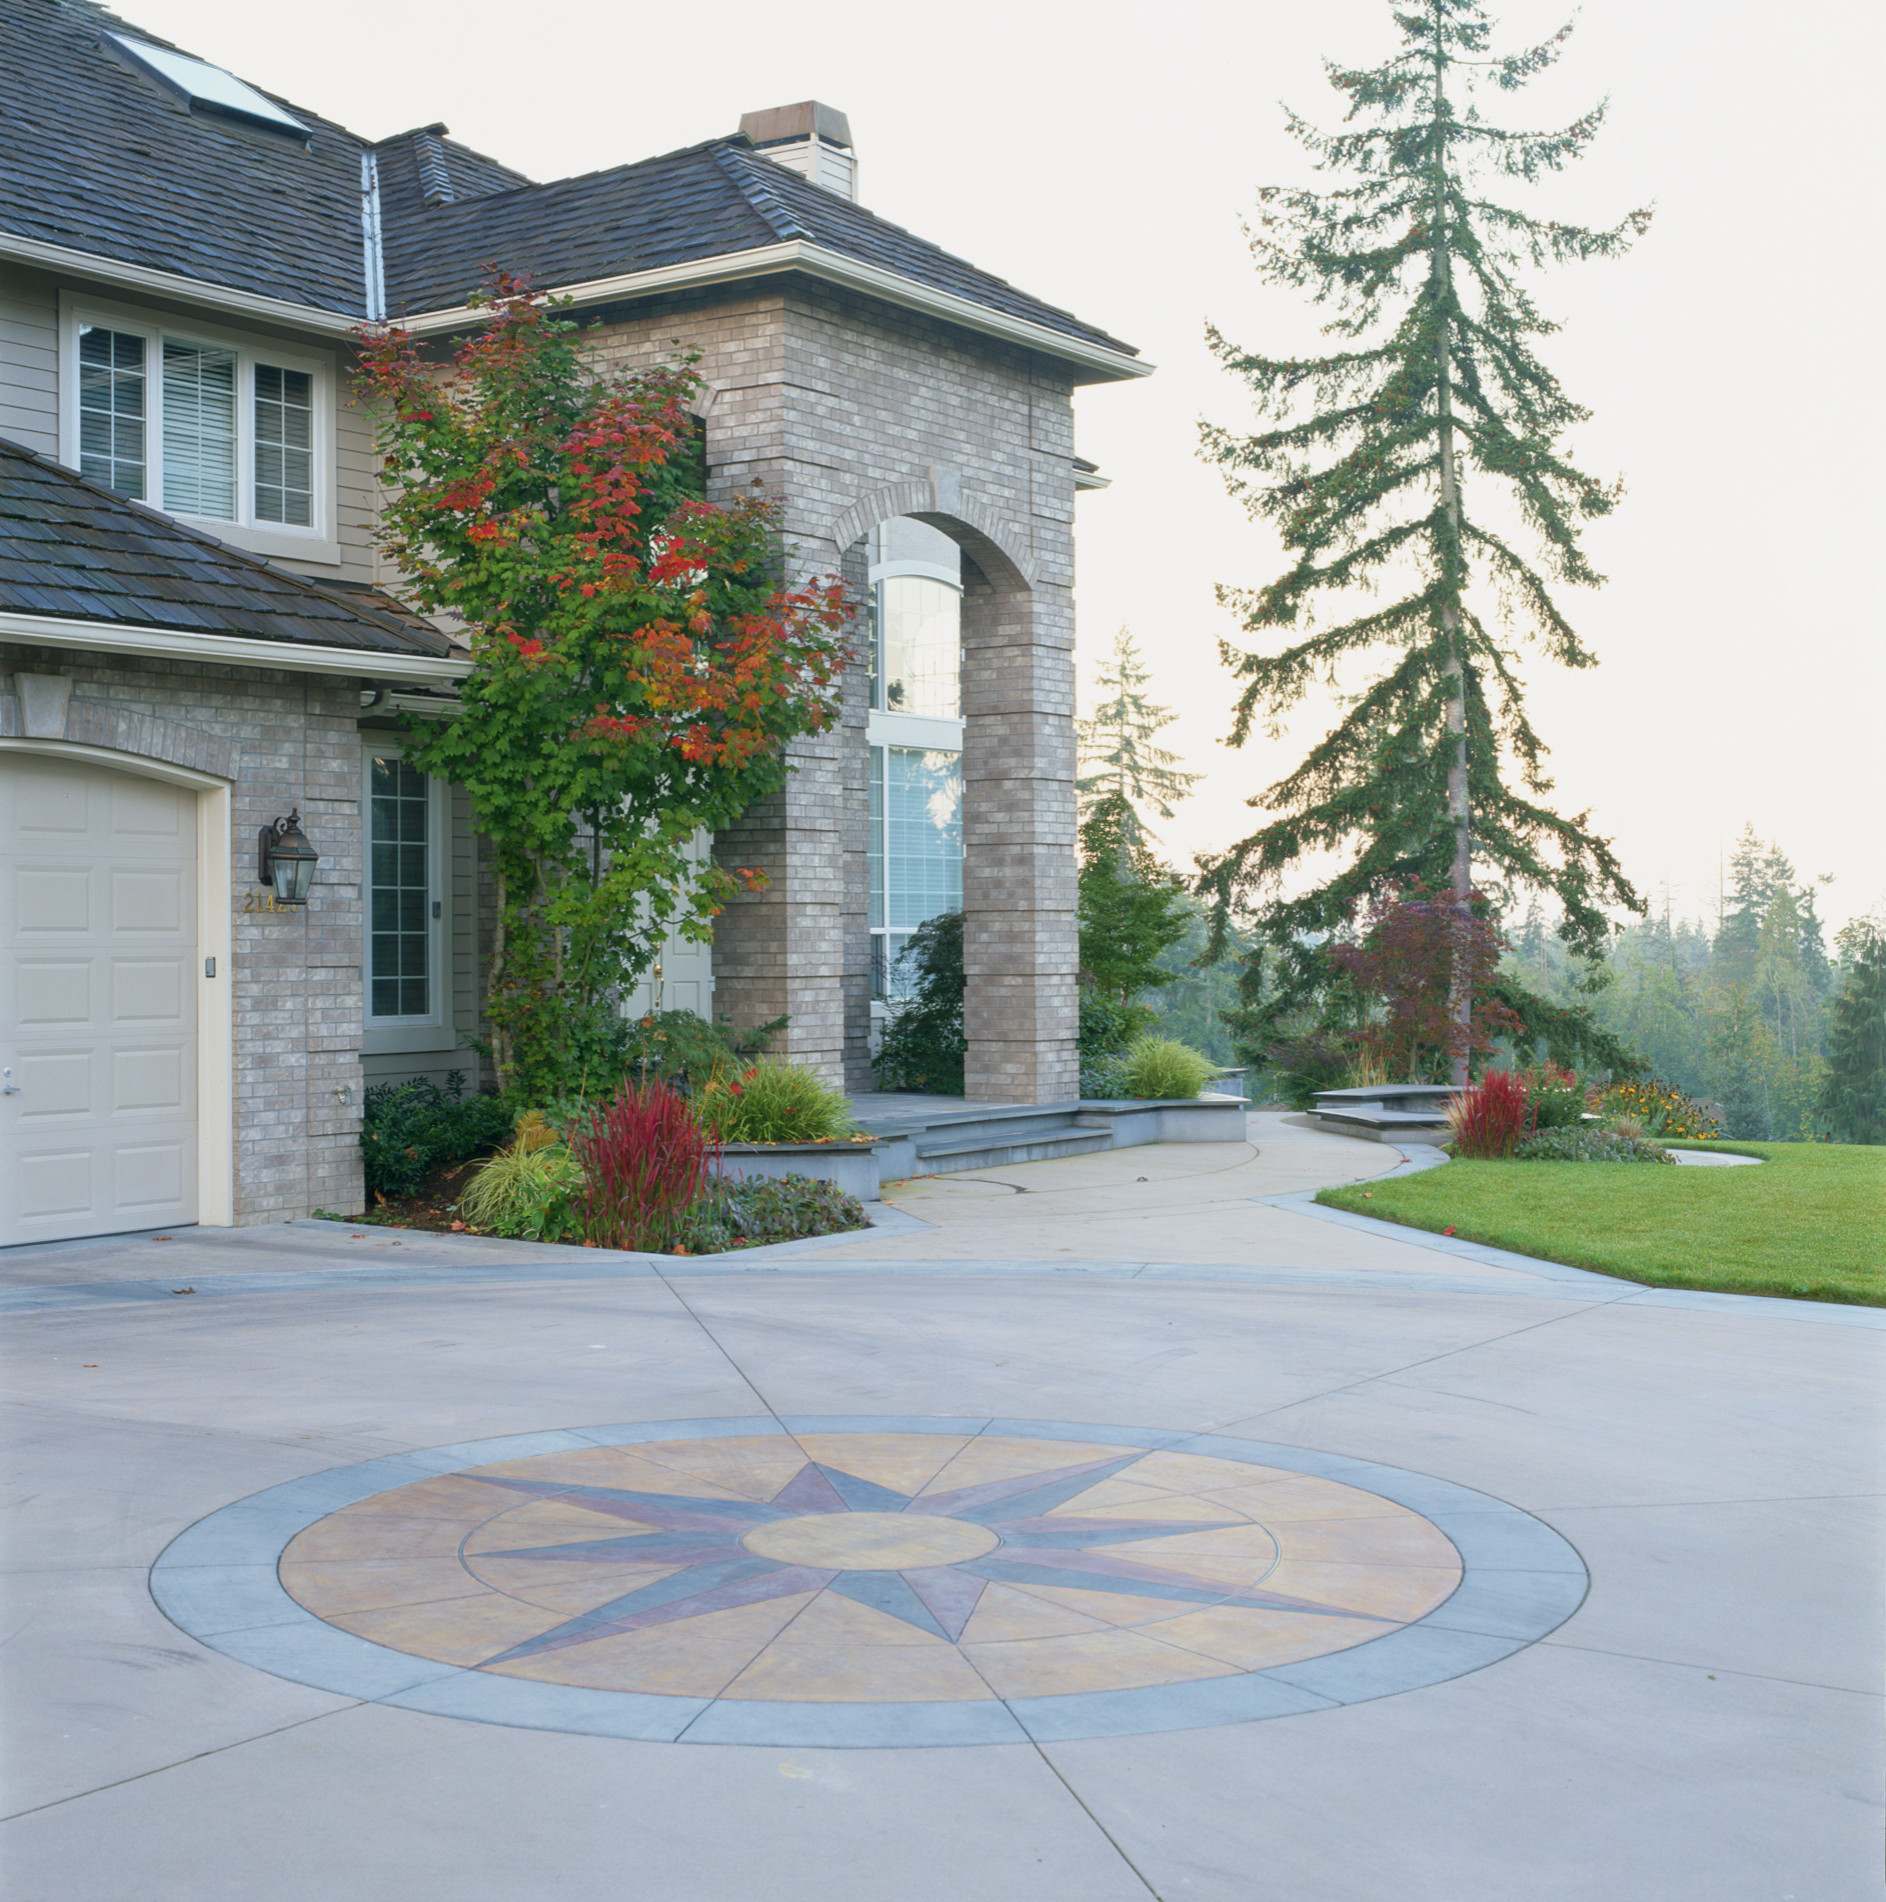 Entry court with compass rose